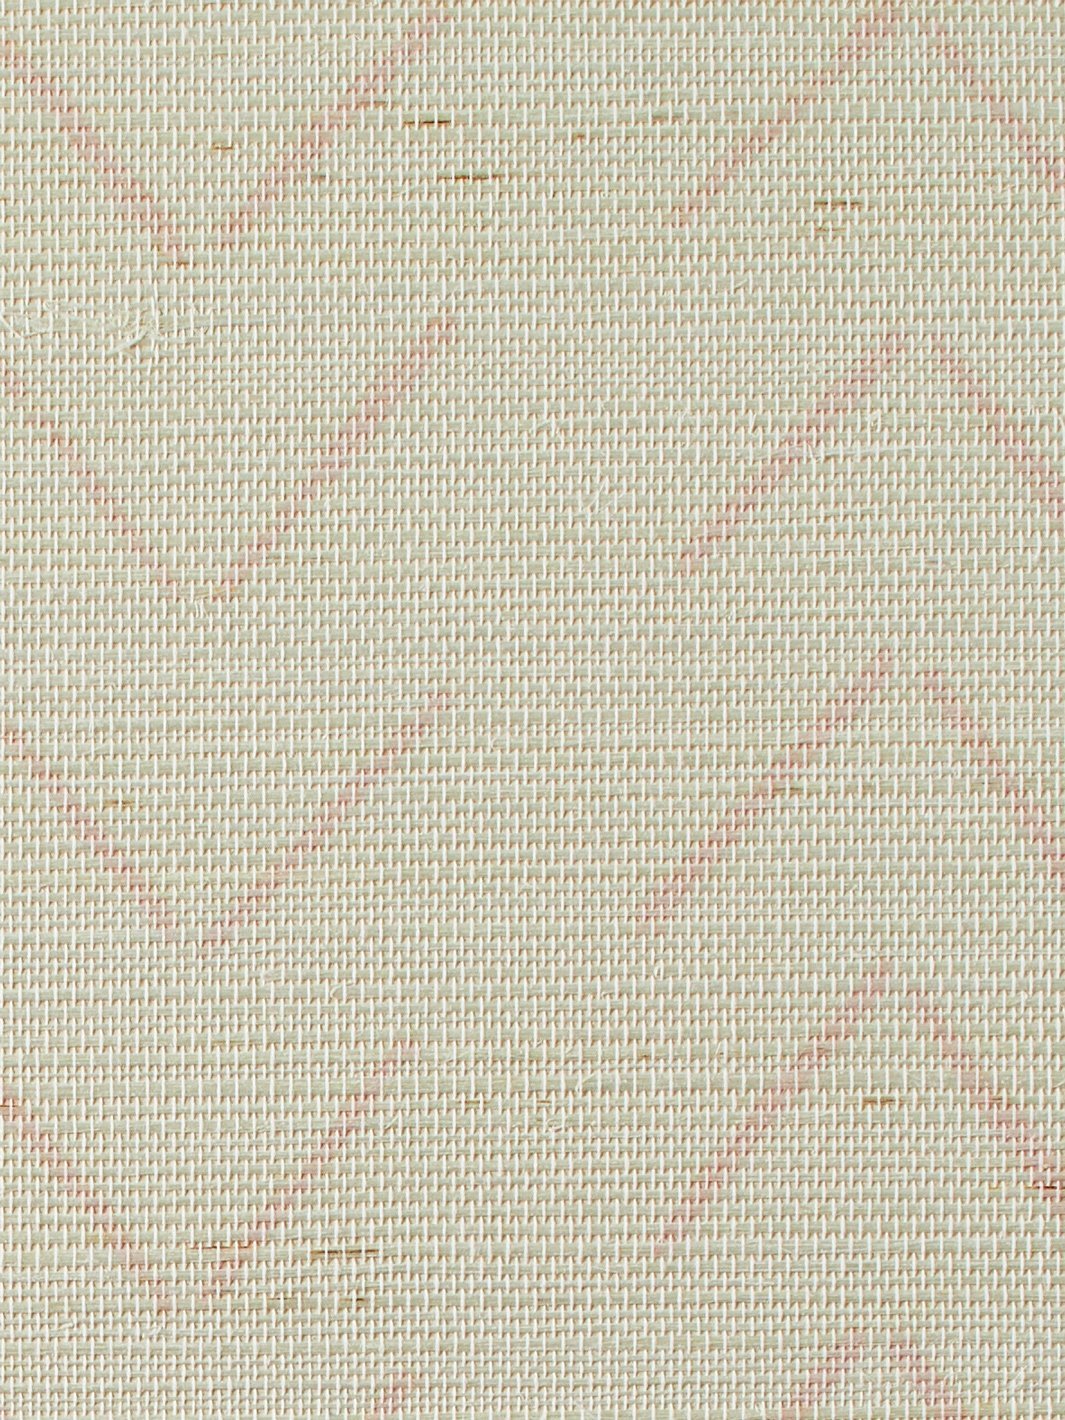 'Arrows' Grasscloth' Wallpaper by Nathan Turner - Pink